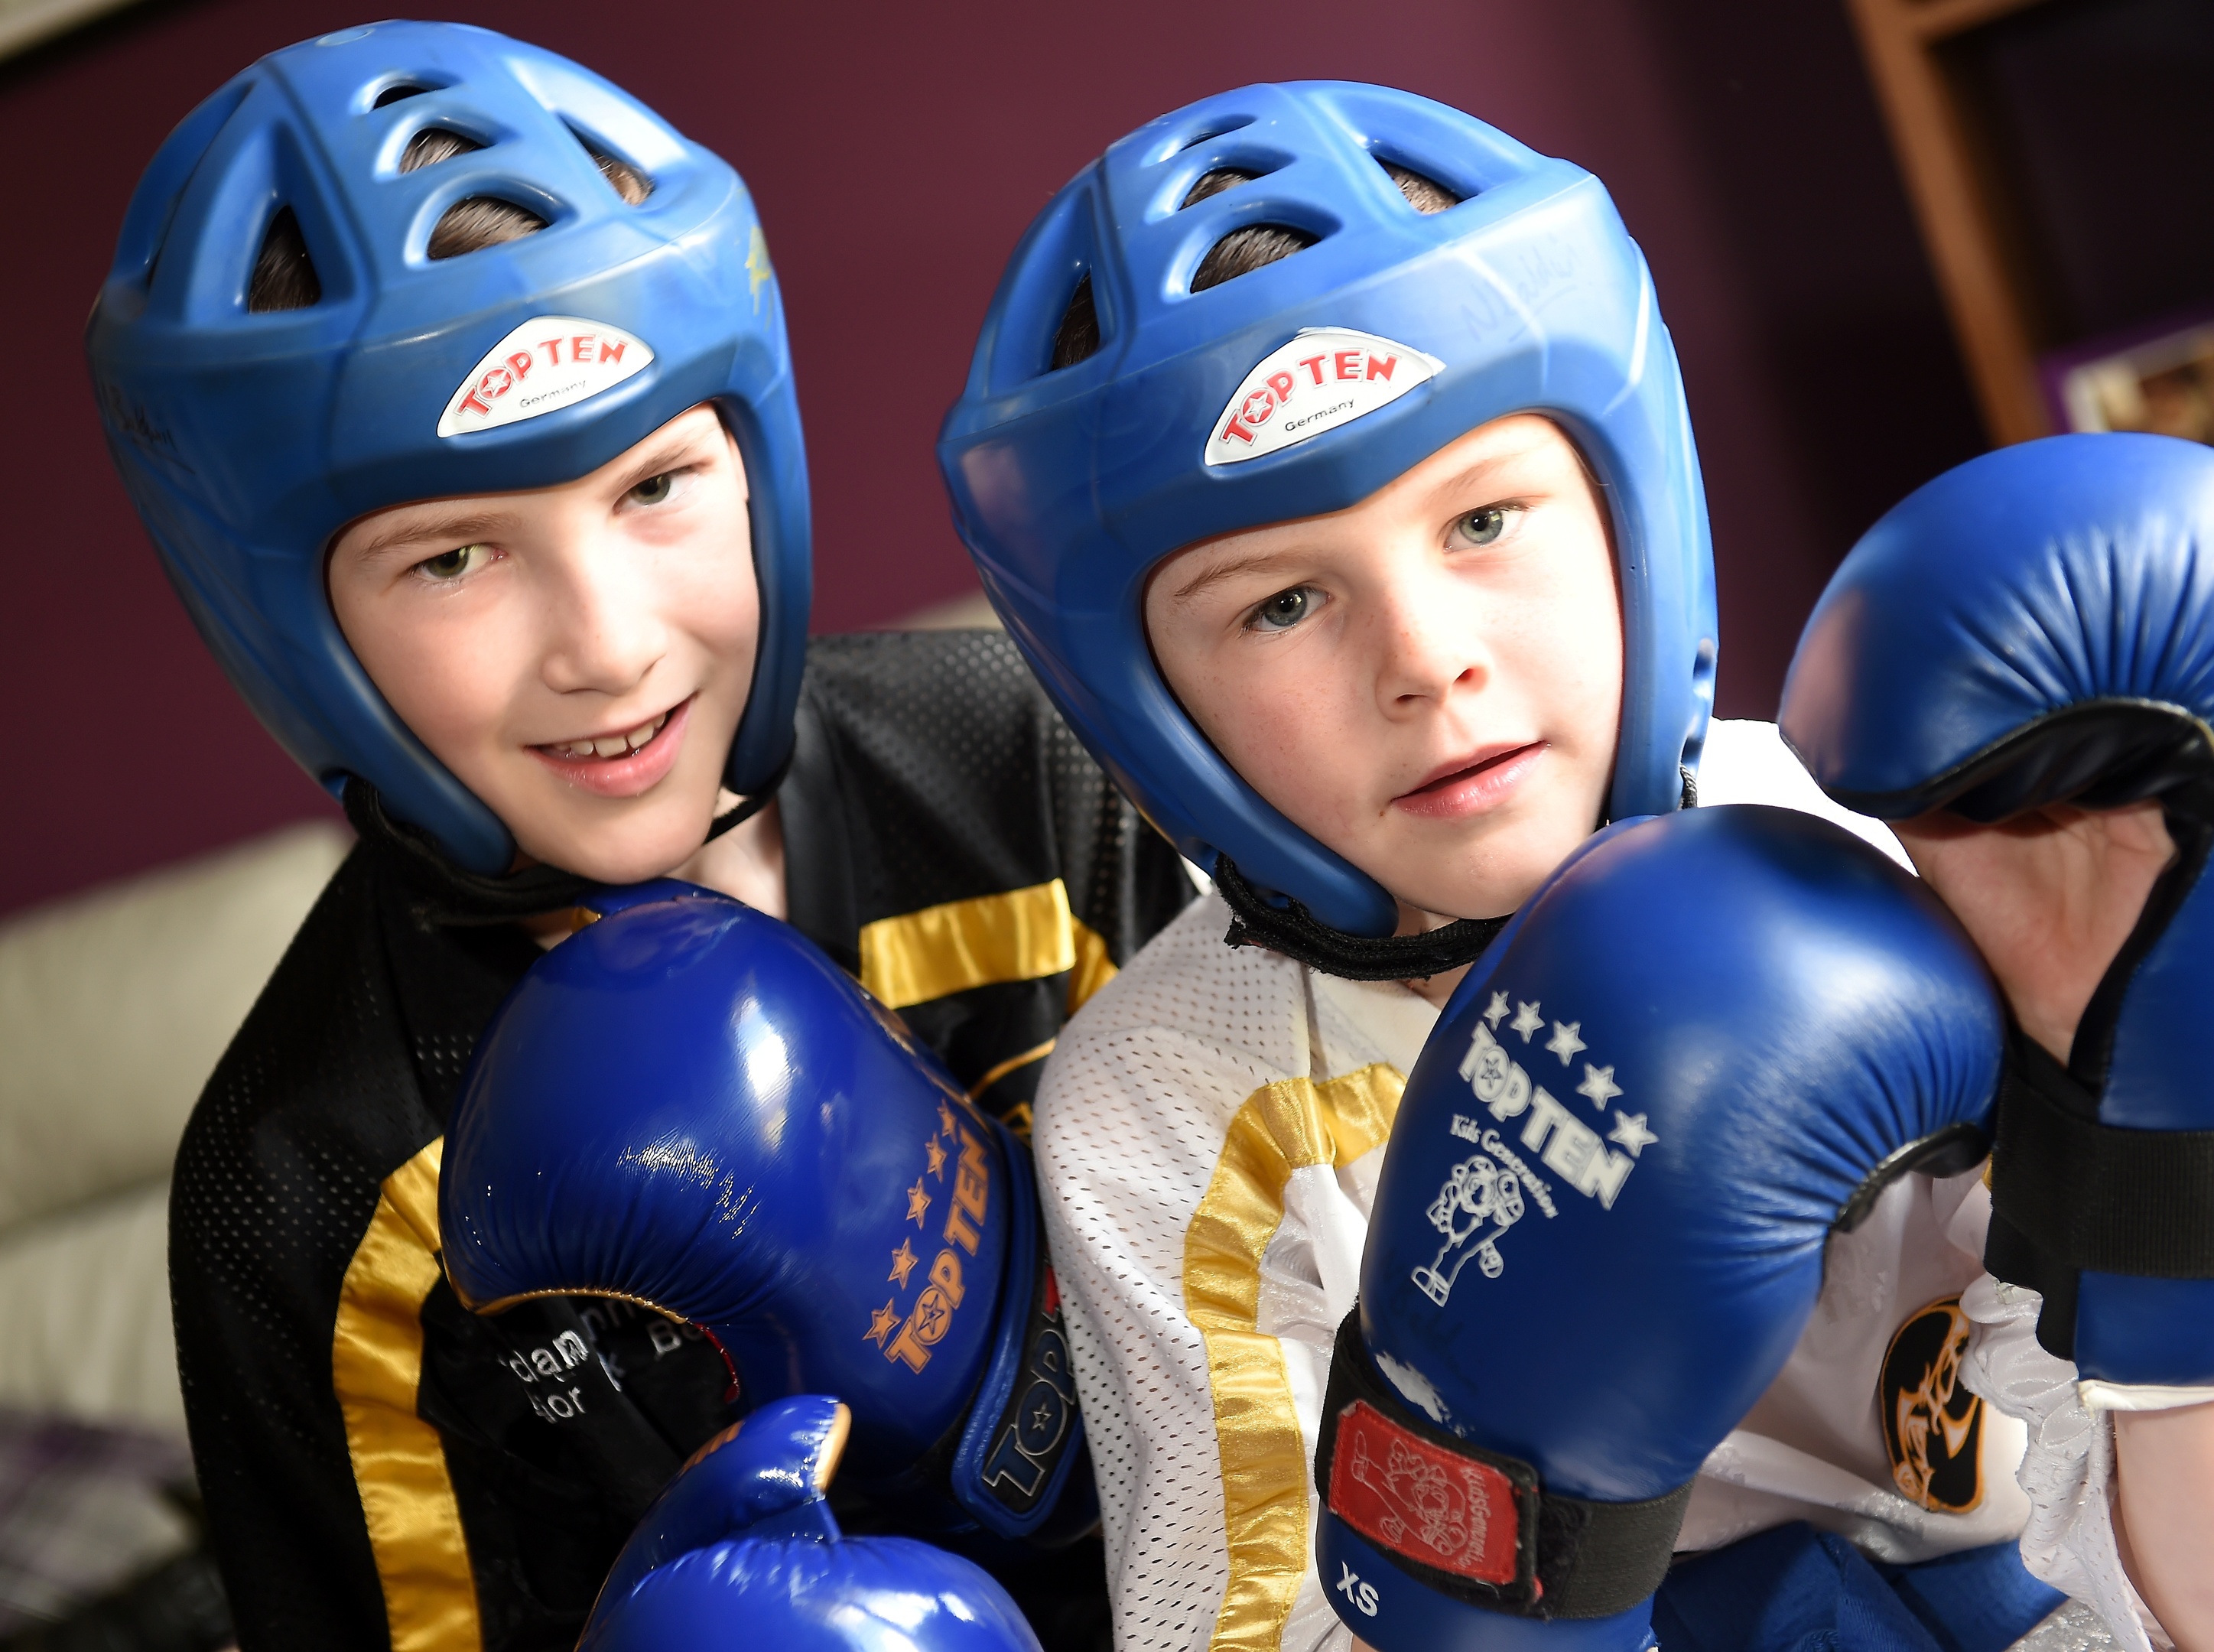 Aidan Lennan, 10, and his younger brother Ciaran, 7,of Inverness who will complete alongside each other for the first time as part of Team Scotland.
Picture by Sandy McCook.